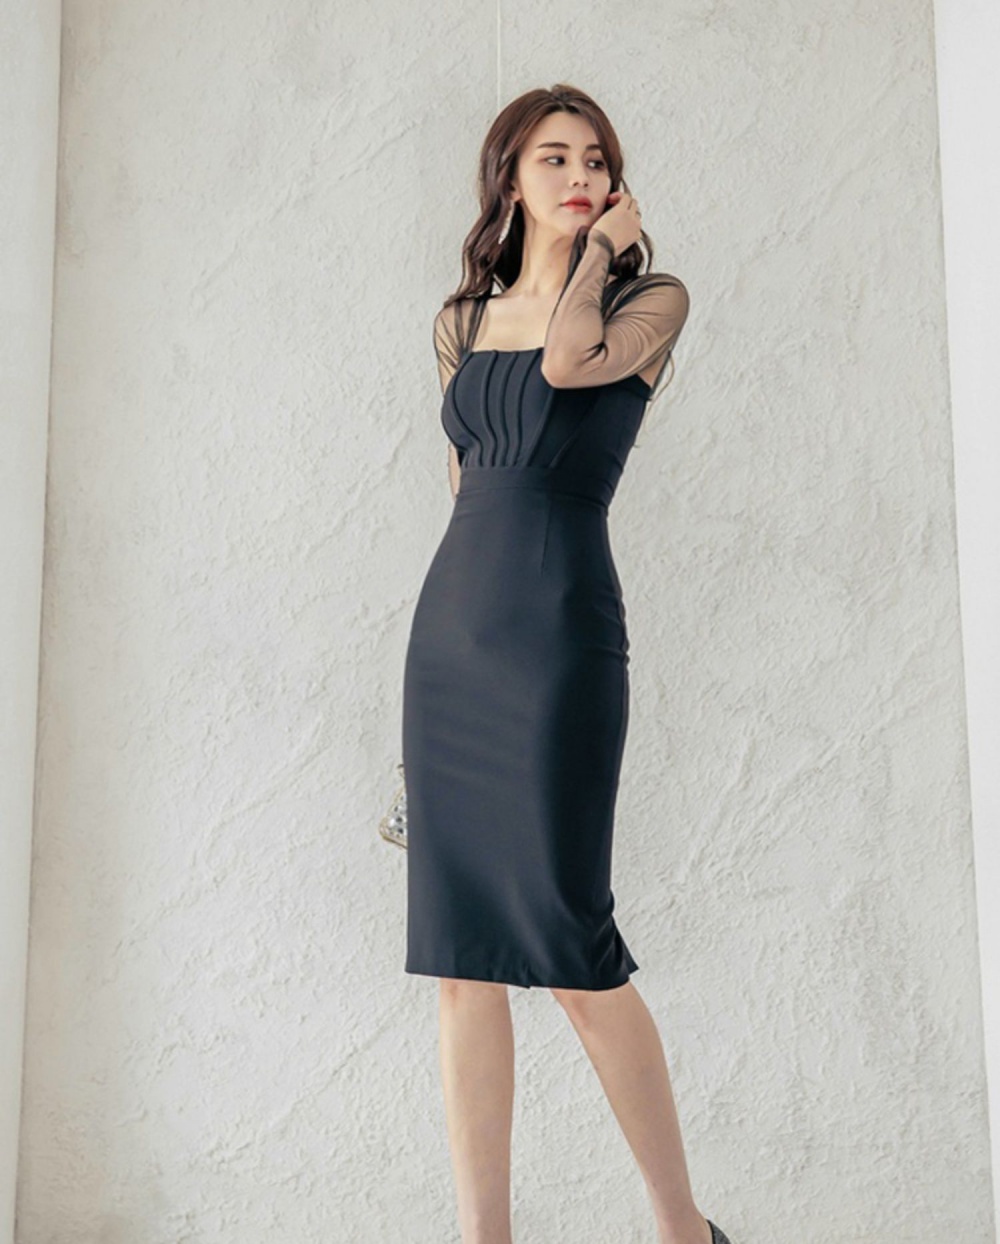 Splice spring pinched waist simple Korean style dress